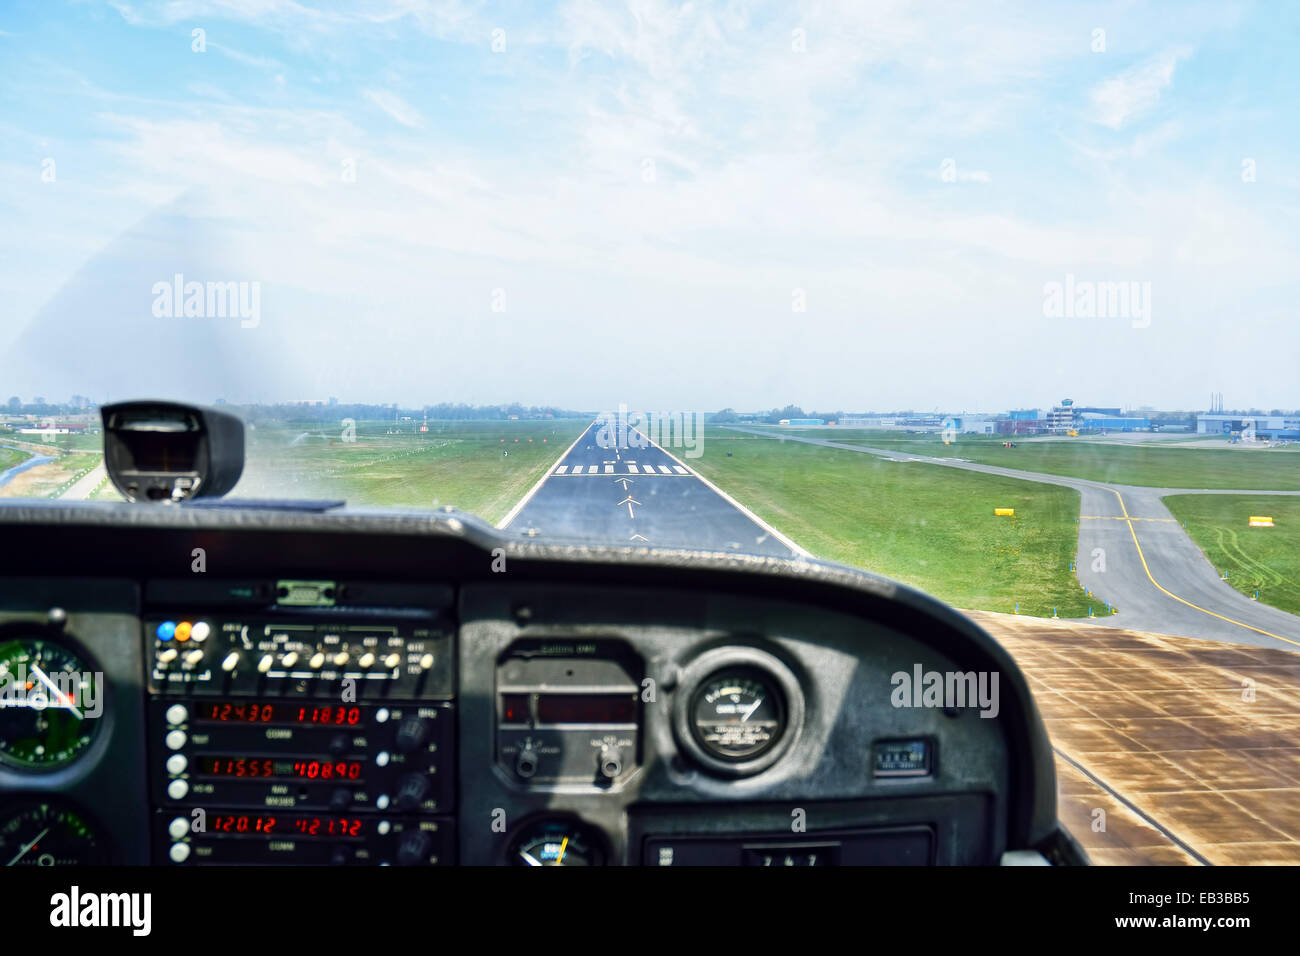 View of an airport runway from the cockpit of an aircraft Stock Photo